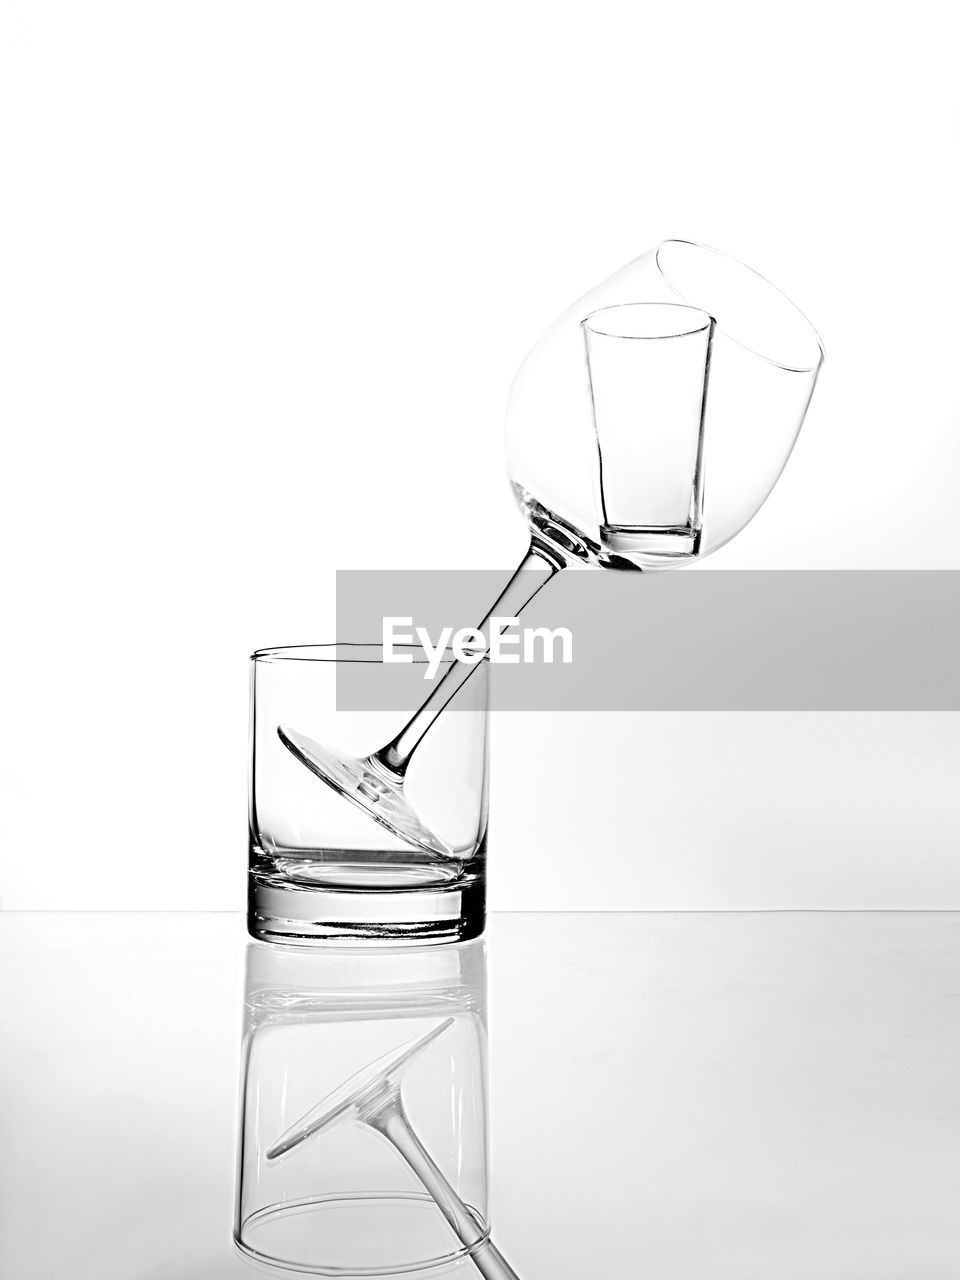 REFLECTION OF GLASS OF WATER